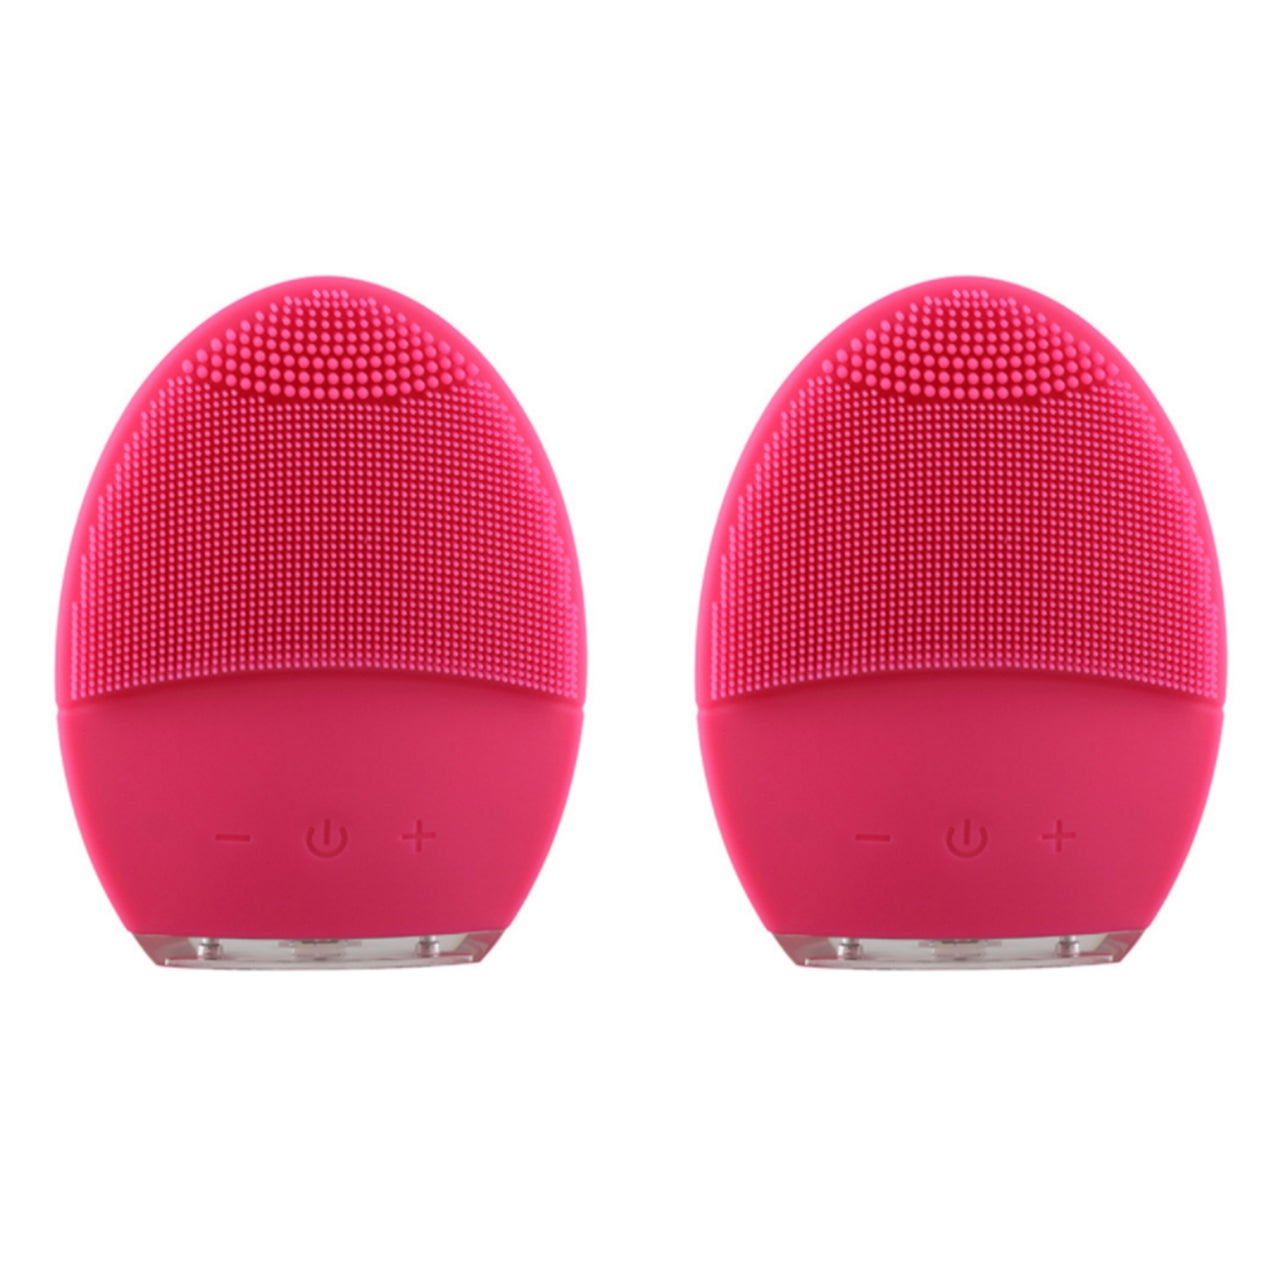 Sonic Facial Cleansing Brush Gentle Exfoliating - 2packs - Red